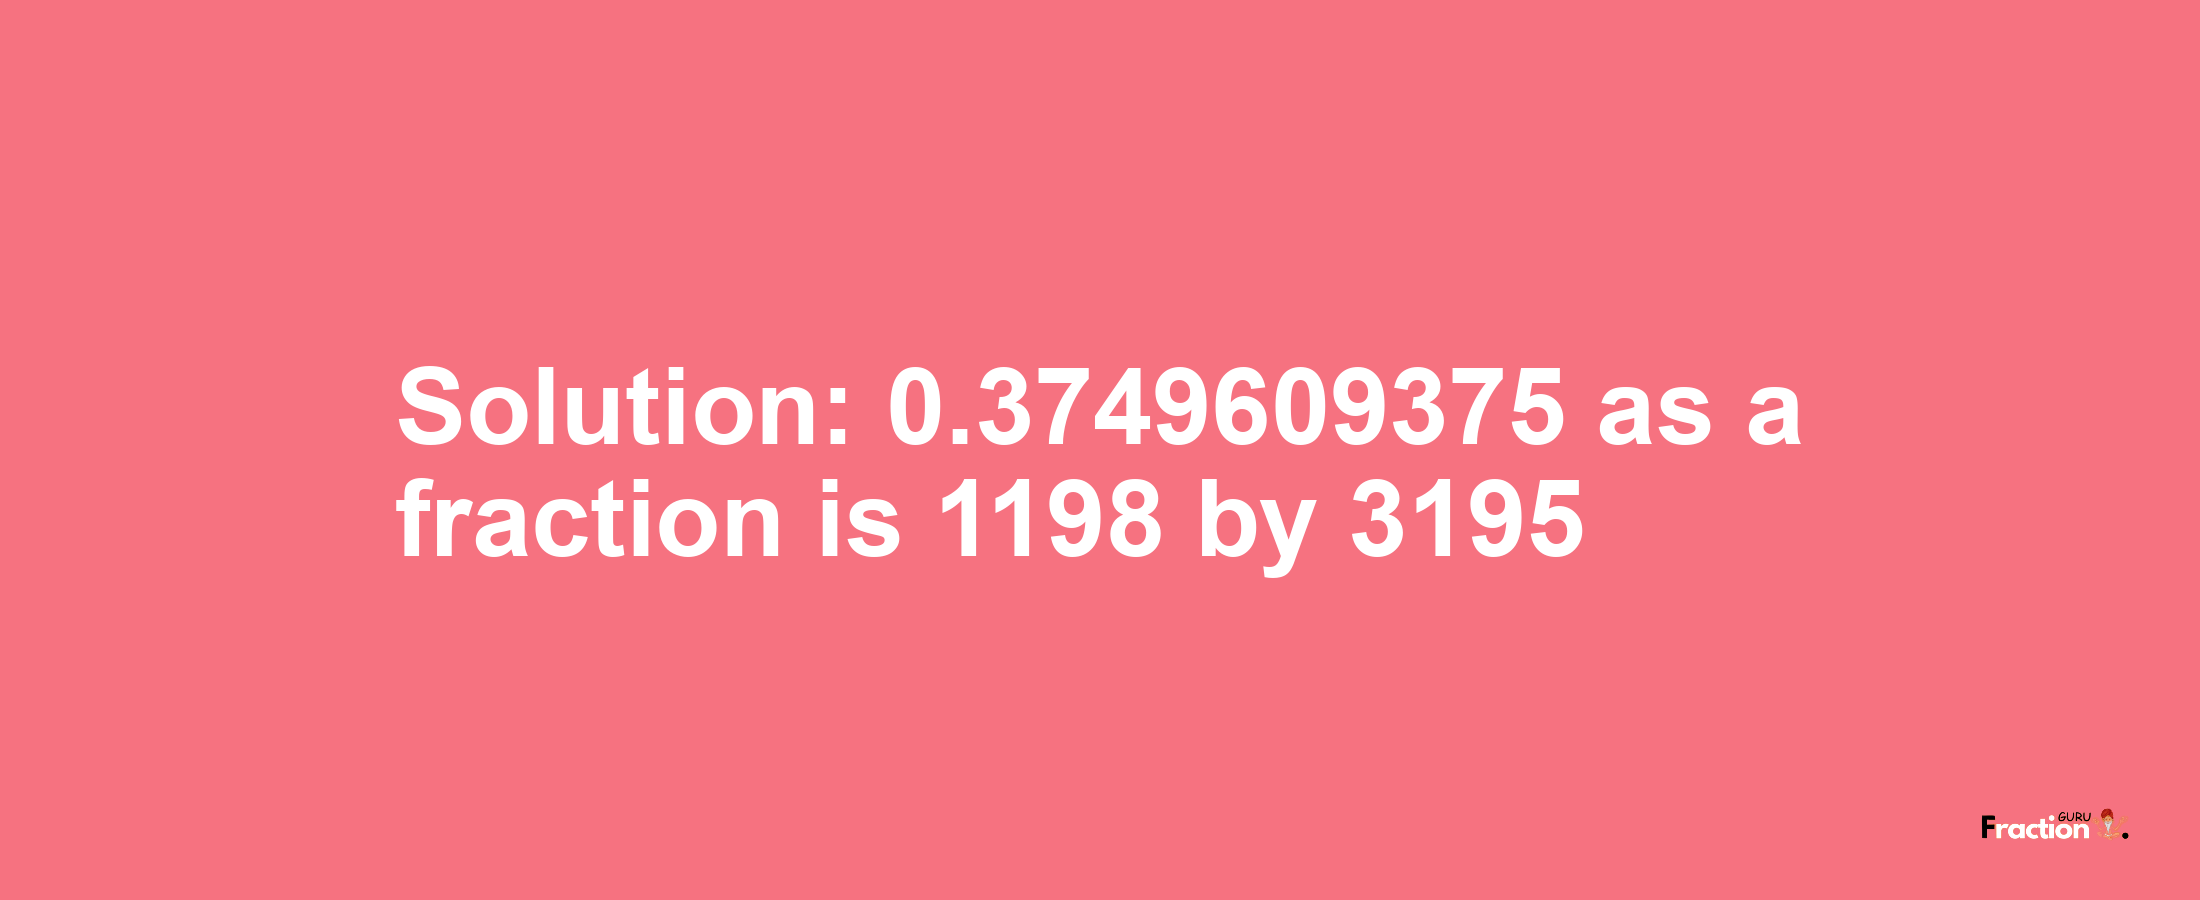 Solution:0.3749609375 as a fraction is 1198/3195